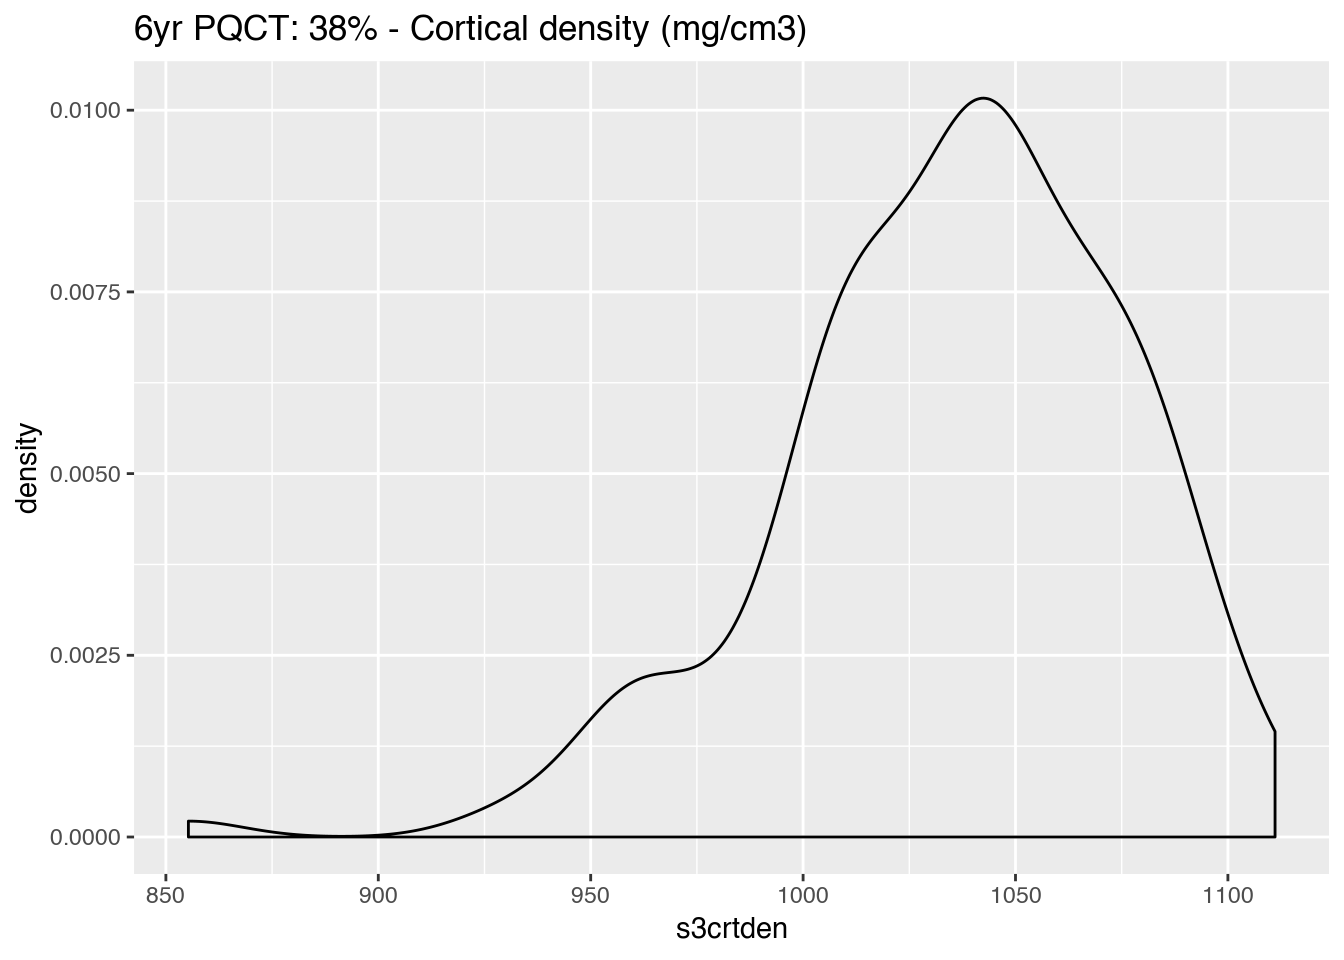 Distribution of cortical density at 38% from the distal end of the tibia (\(mg~cm^{-3}\)) at 6 years of age (s3crtden), as measured by PQCT (n = 141).